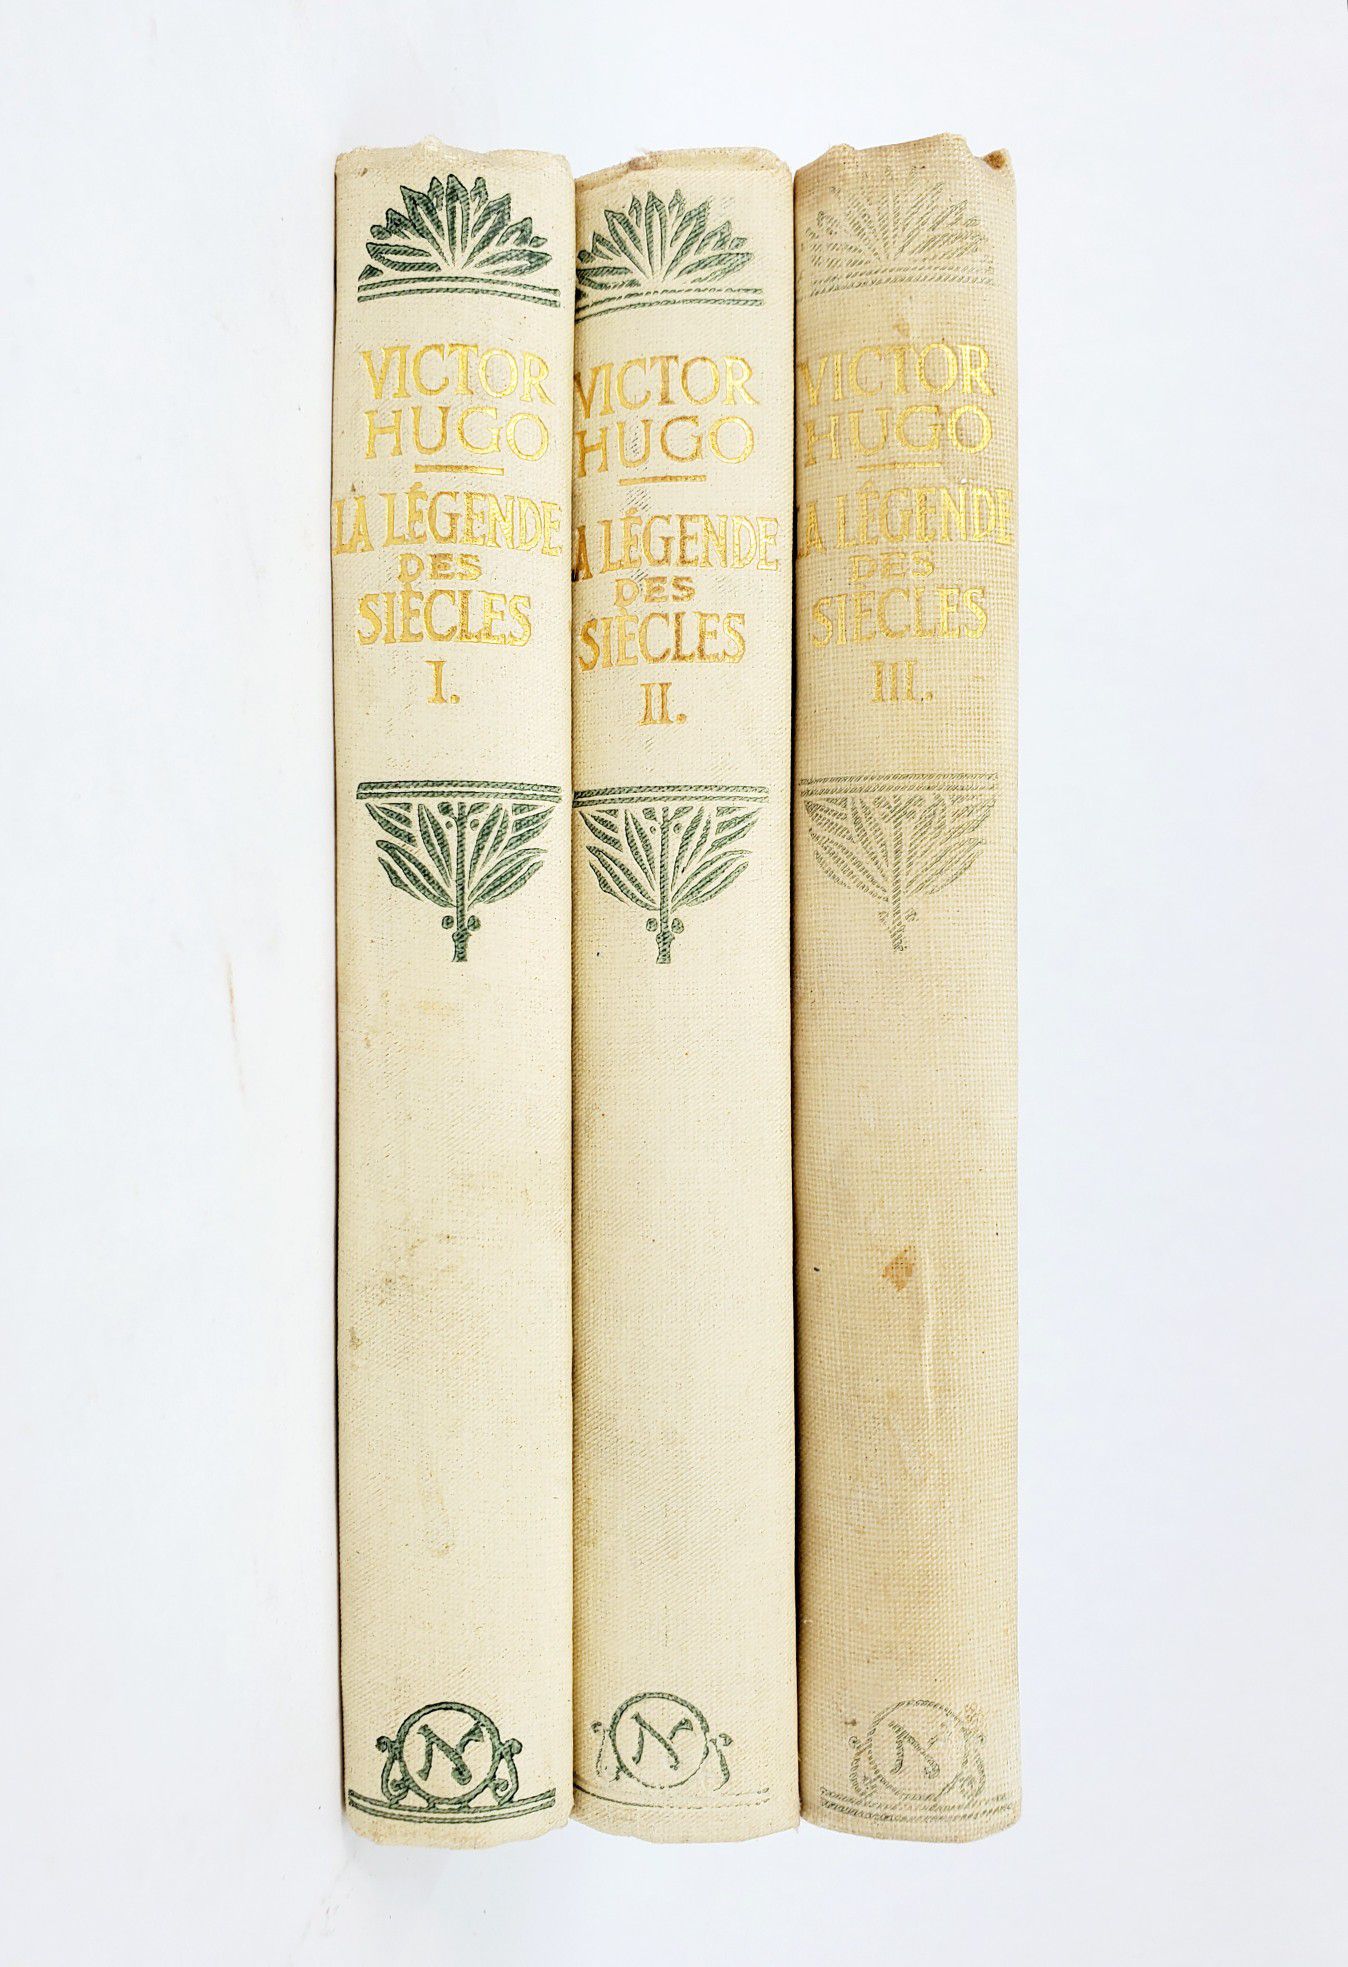 La Legende des Siecles Books I, II, & III by Victor Hugo - Text in French - Hardcover Nelson Editors circa 1920's-30's